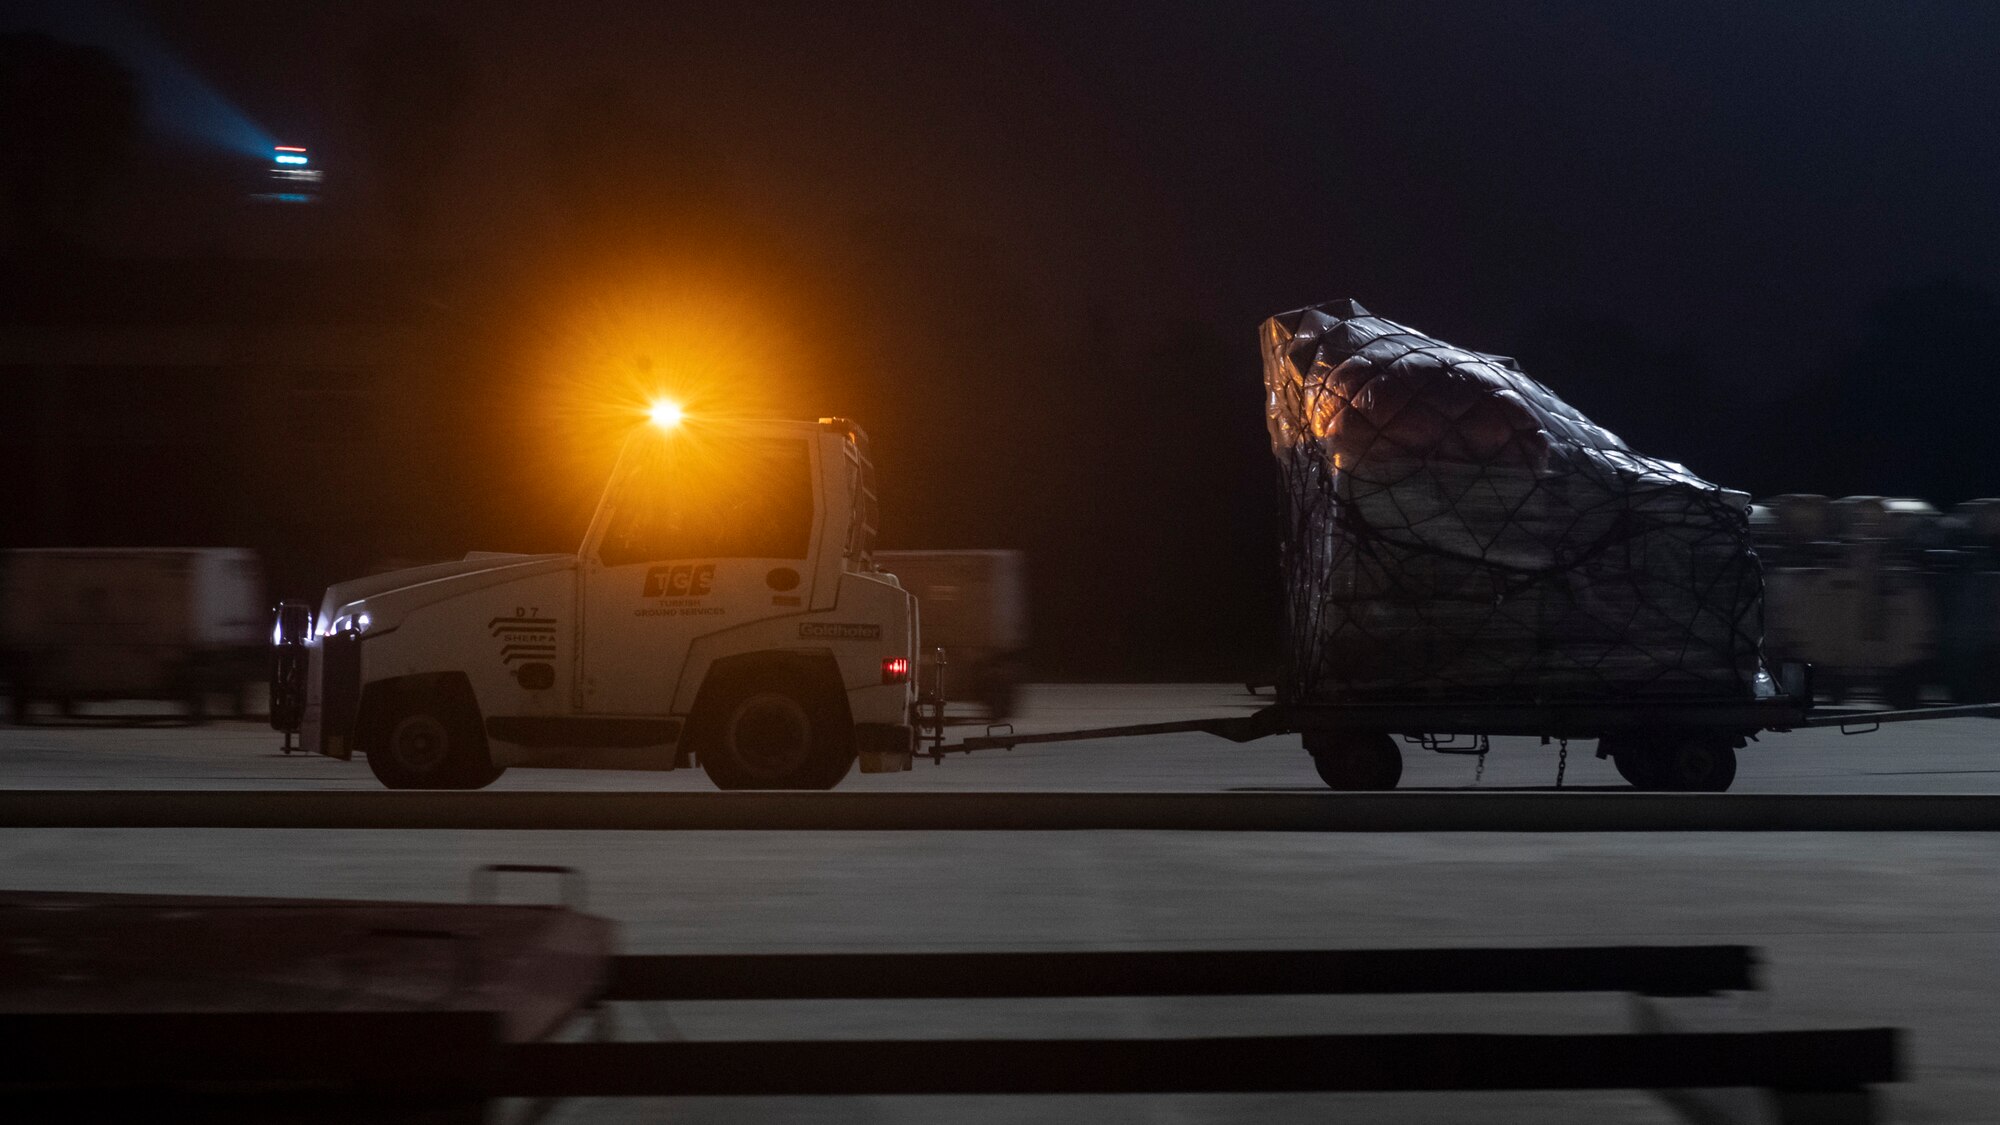 An airport baggage truck hauls humanitarian cargo from the flight line to a transient storage area in support of Turkish government earthquake relief operations March 3, 2023, at Incirlik Air Base, Türkiye. U.S. military organizations are working with interagency colleagues to harness the unique capabilities available to assist those affected by the February 6 earthquakes. The U.S. military’s role during these relief missions is to rapidly respond to this natural disaster with critical support capabilities and life-saving equipment, transporting assistance for aid areas the government of Türkiye deems most necessary. (U.S. Air Force photo by Staff Sgt. Peter Reft)